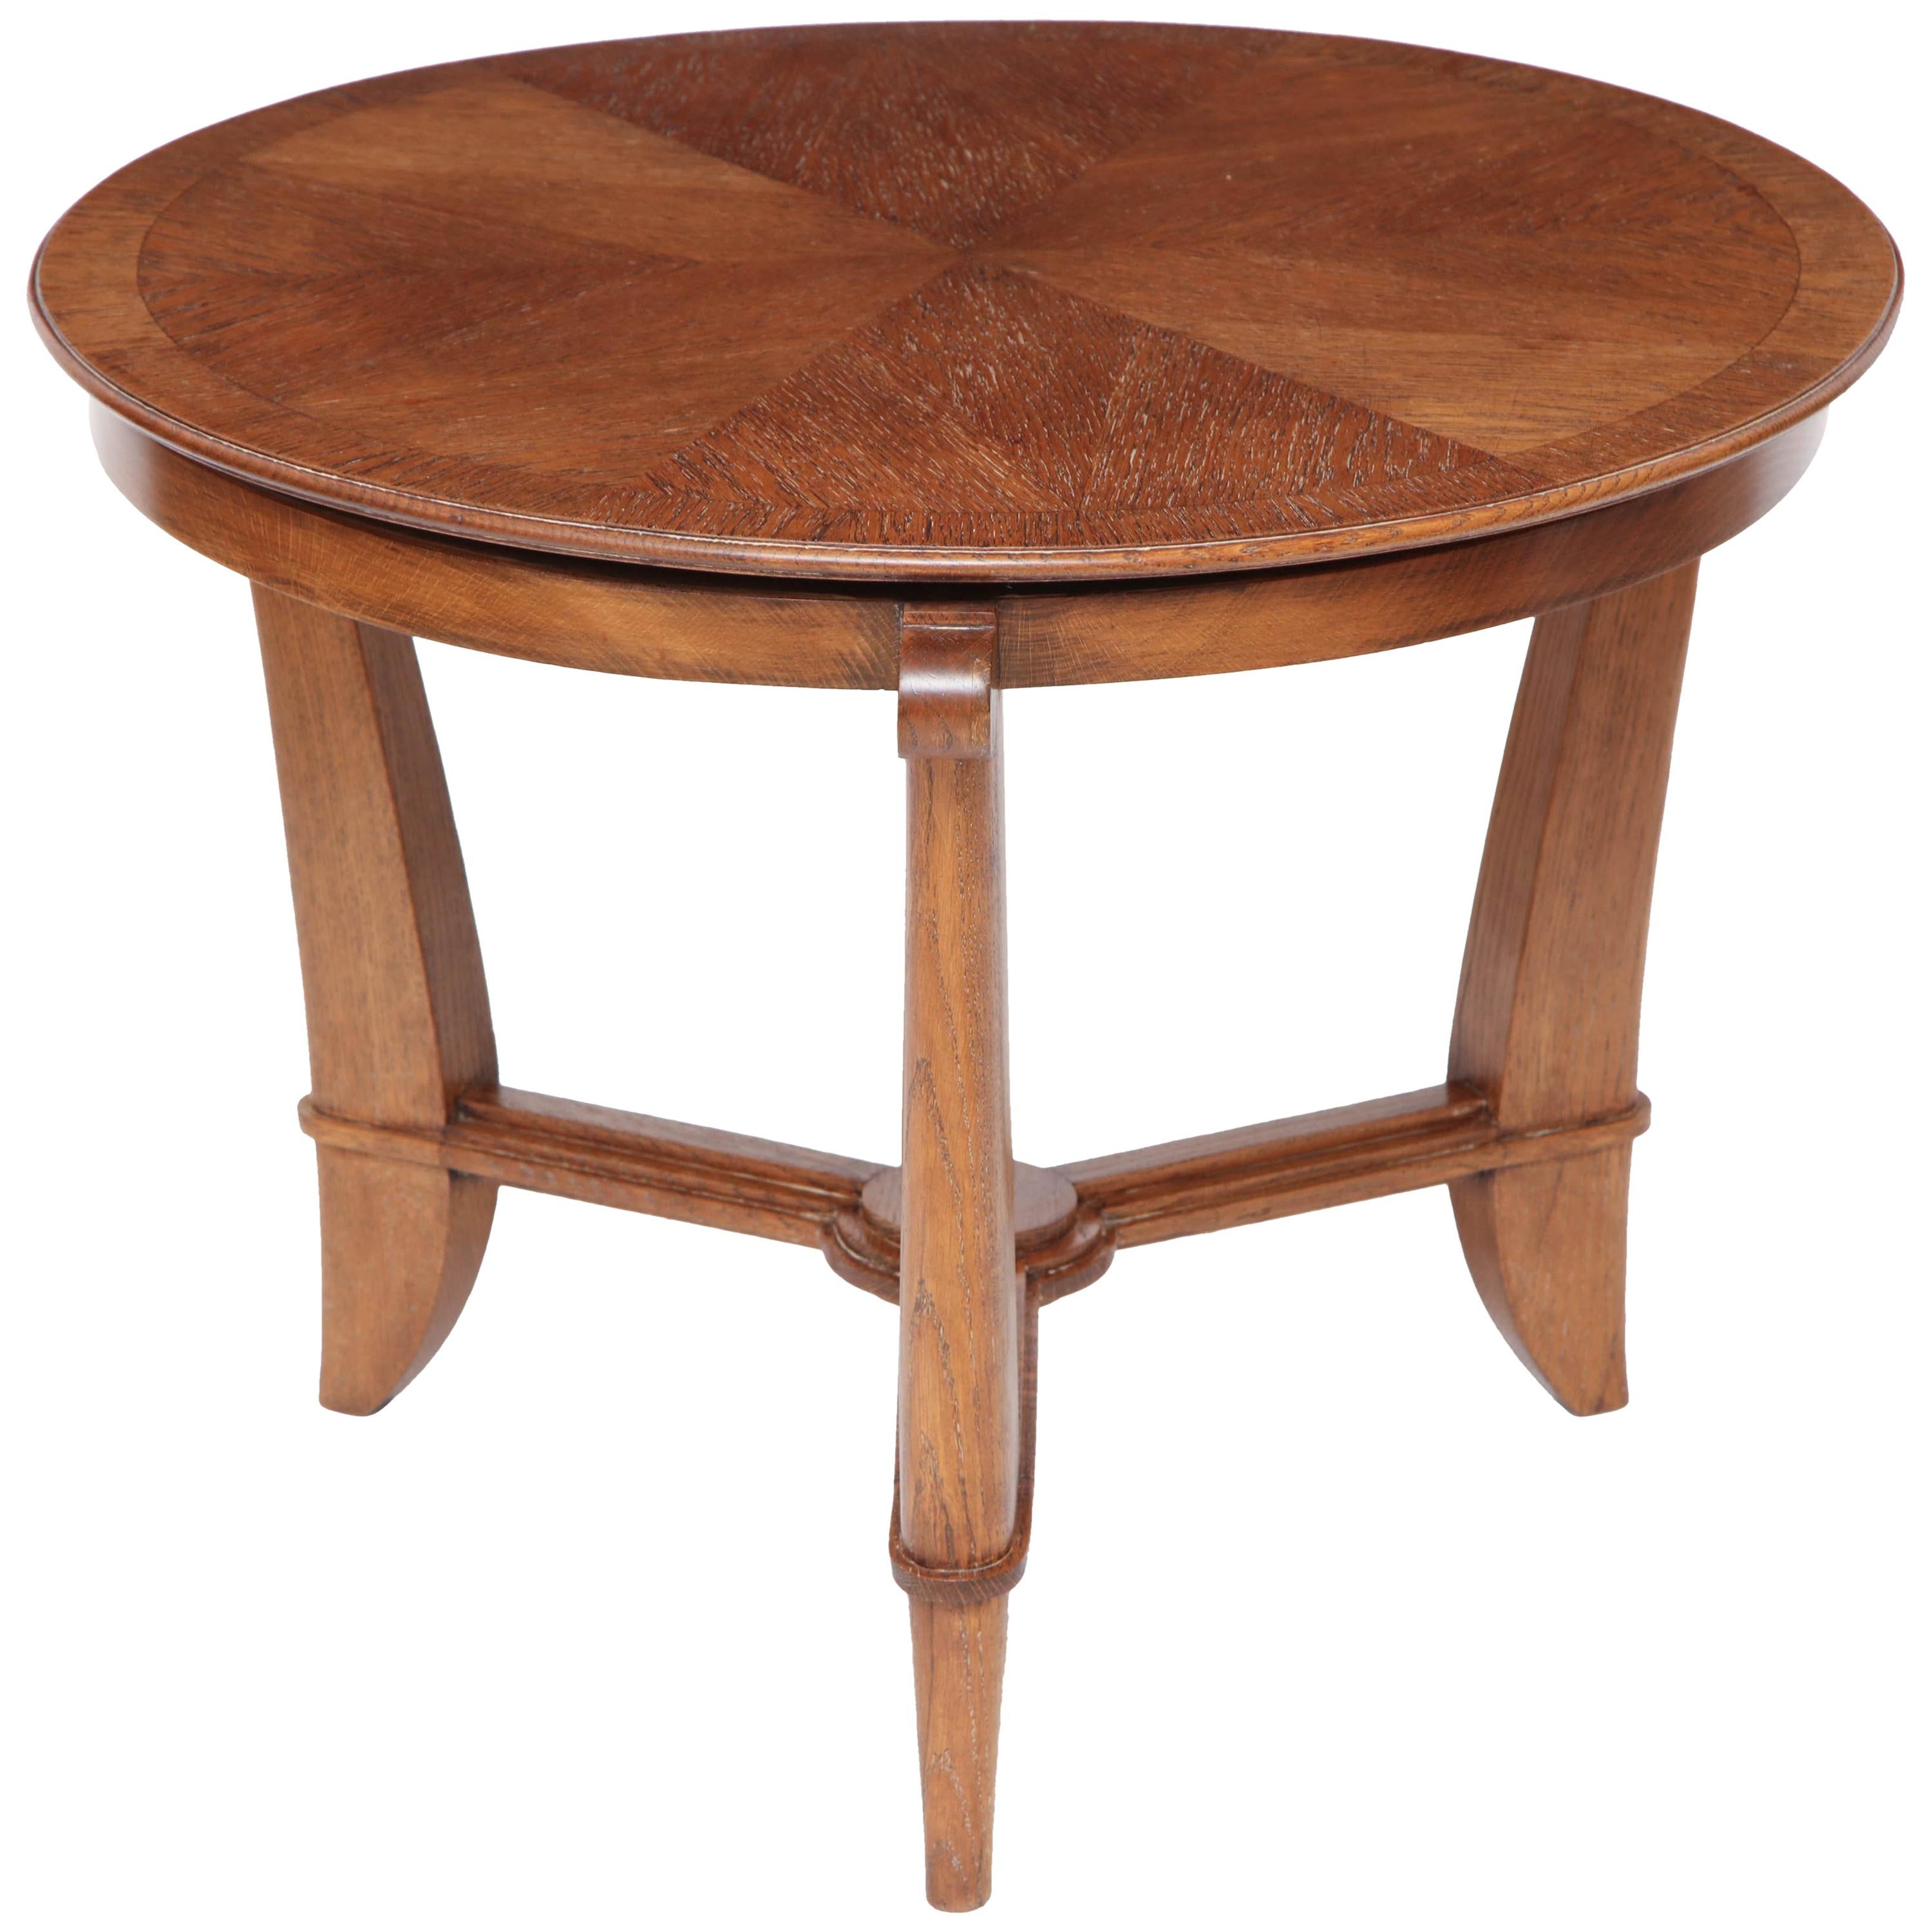 French Art Deco Circular Oak Side Table with Shaped Legs For Sale